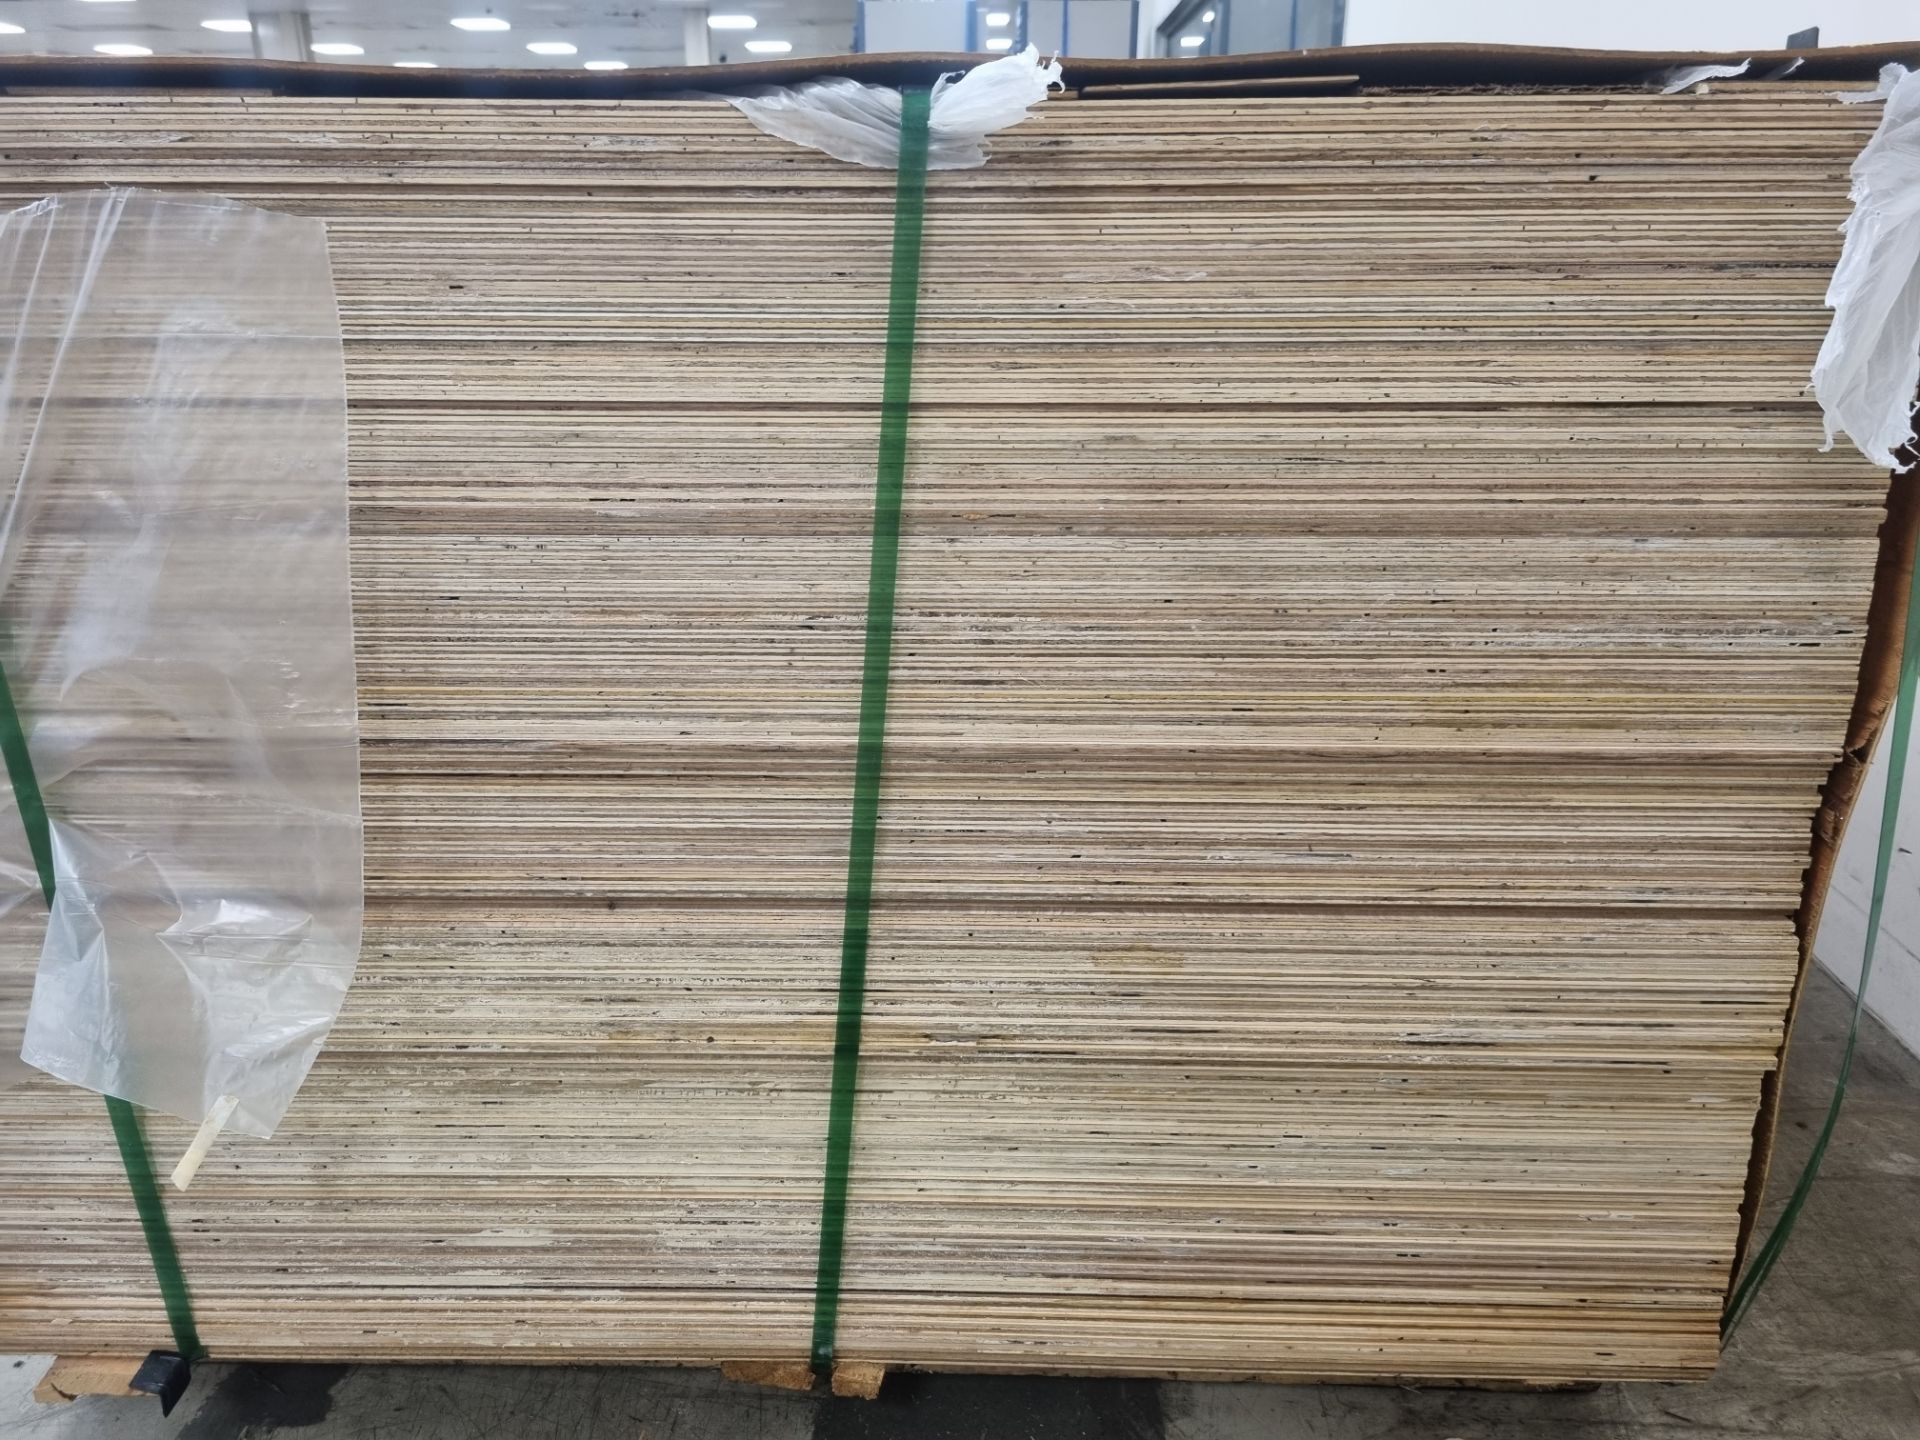 Pallet of 9mm Class 2 plywood - 8x4ft (244x122cm) - 100 sheets - Image 4 of 4